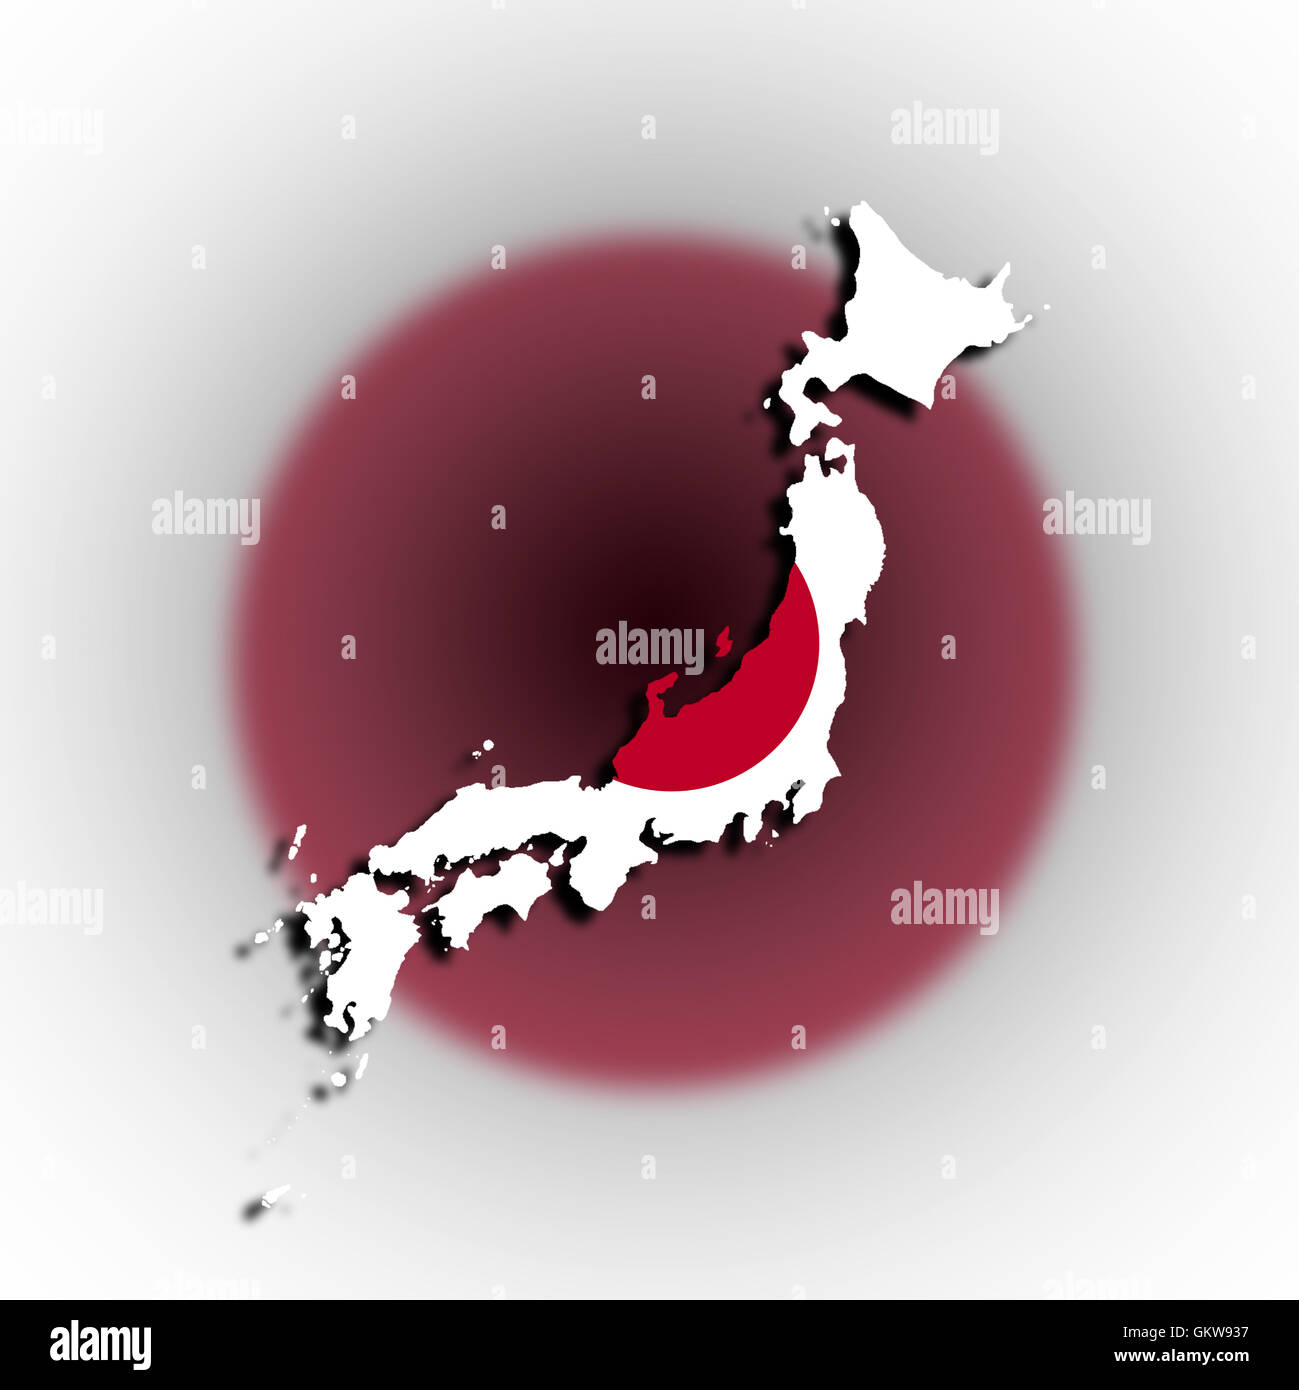 Japan map with the flag inside Stock Photo